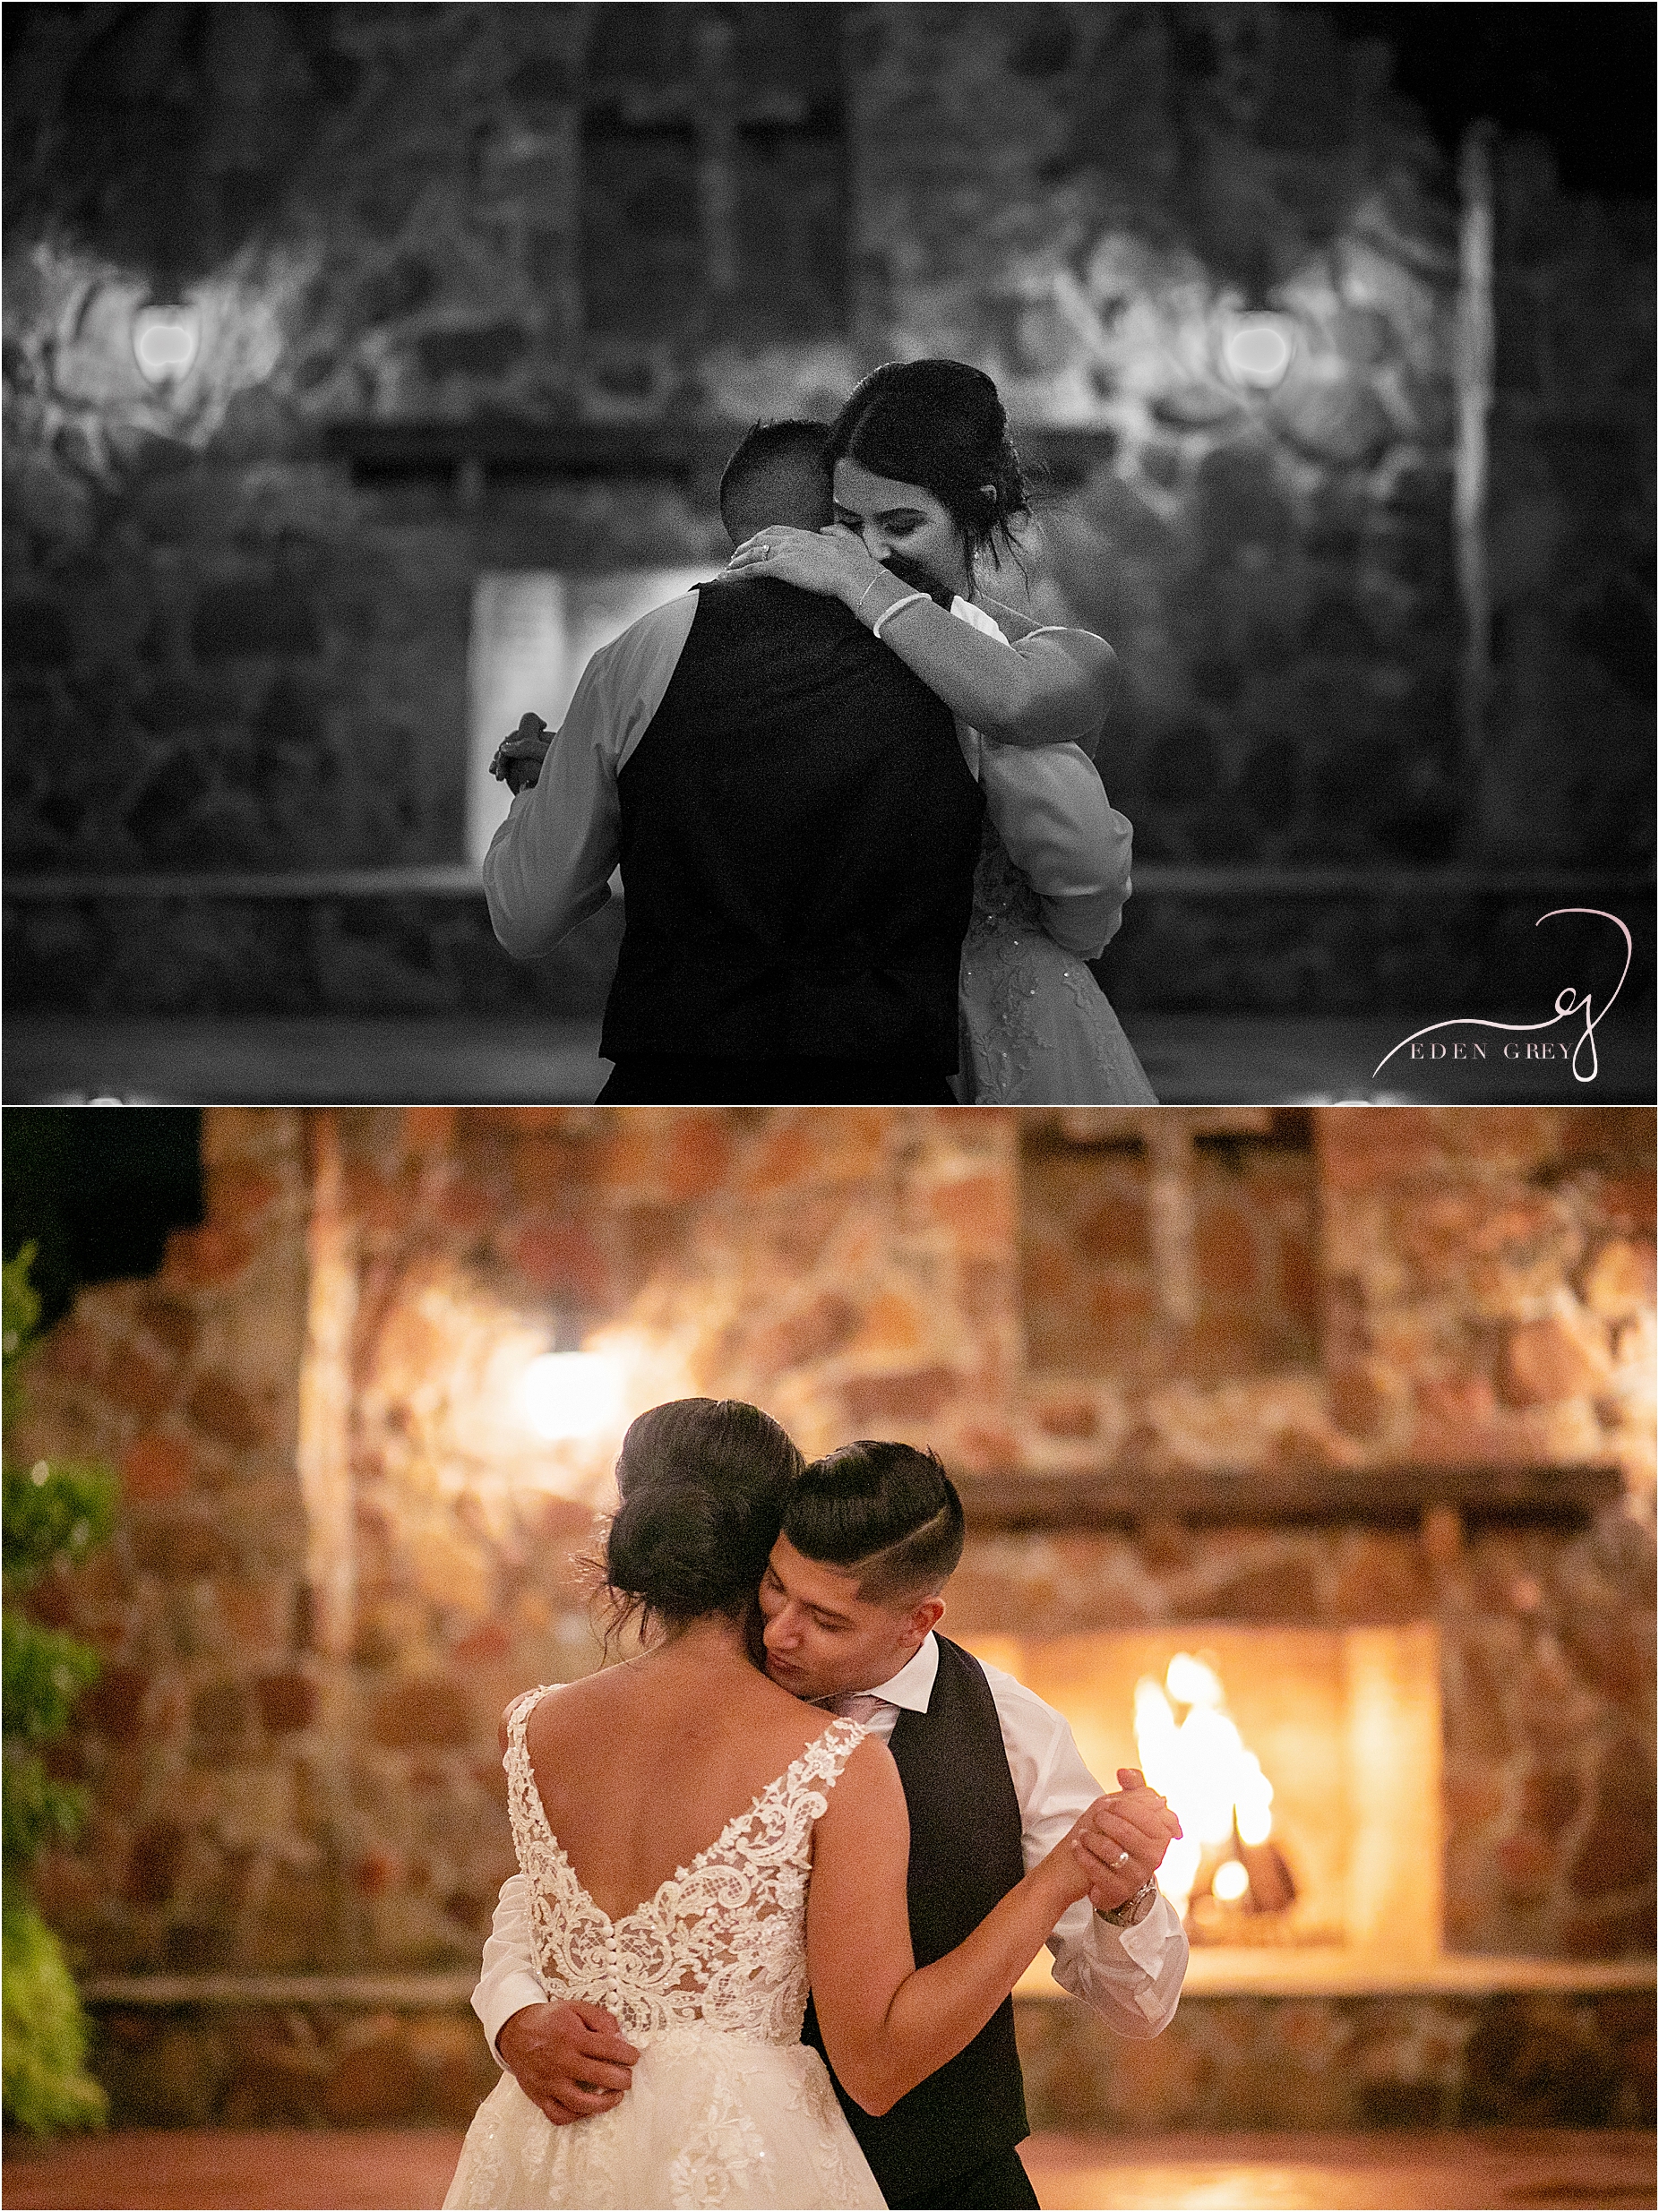 A private last dance at a wedding is such a sweet moment